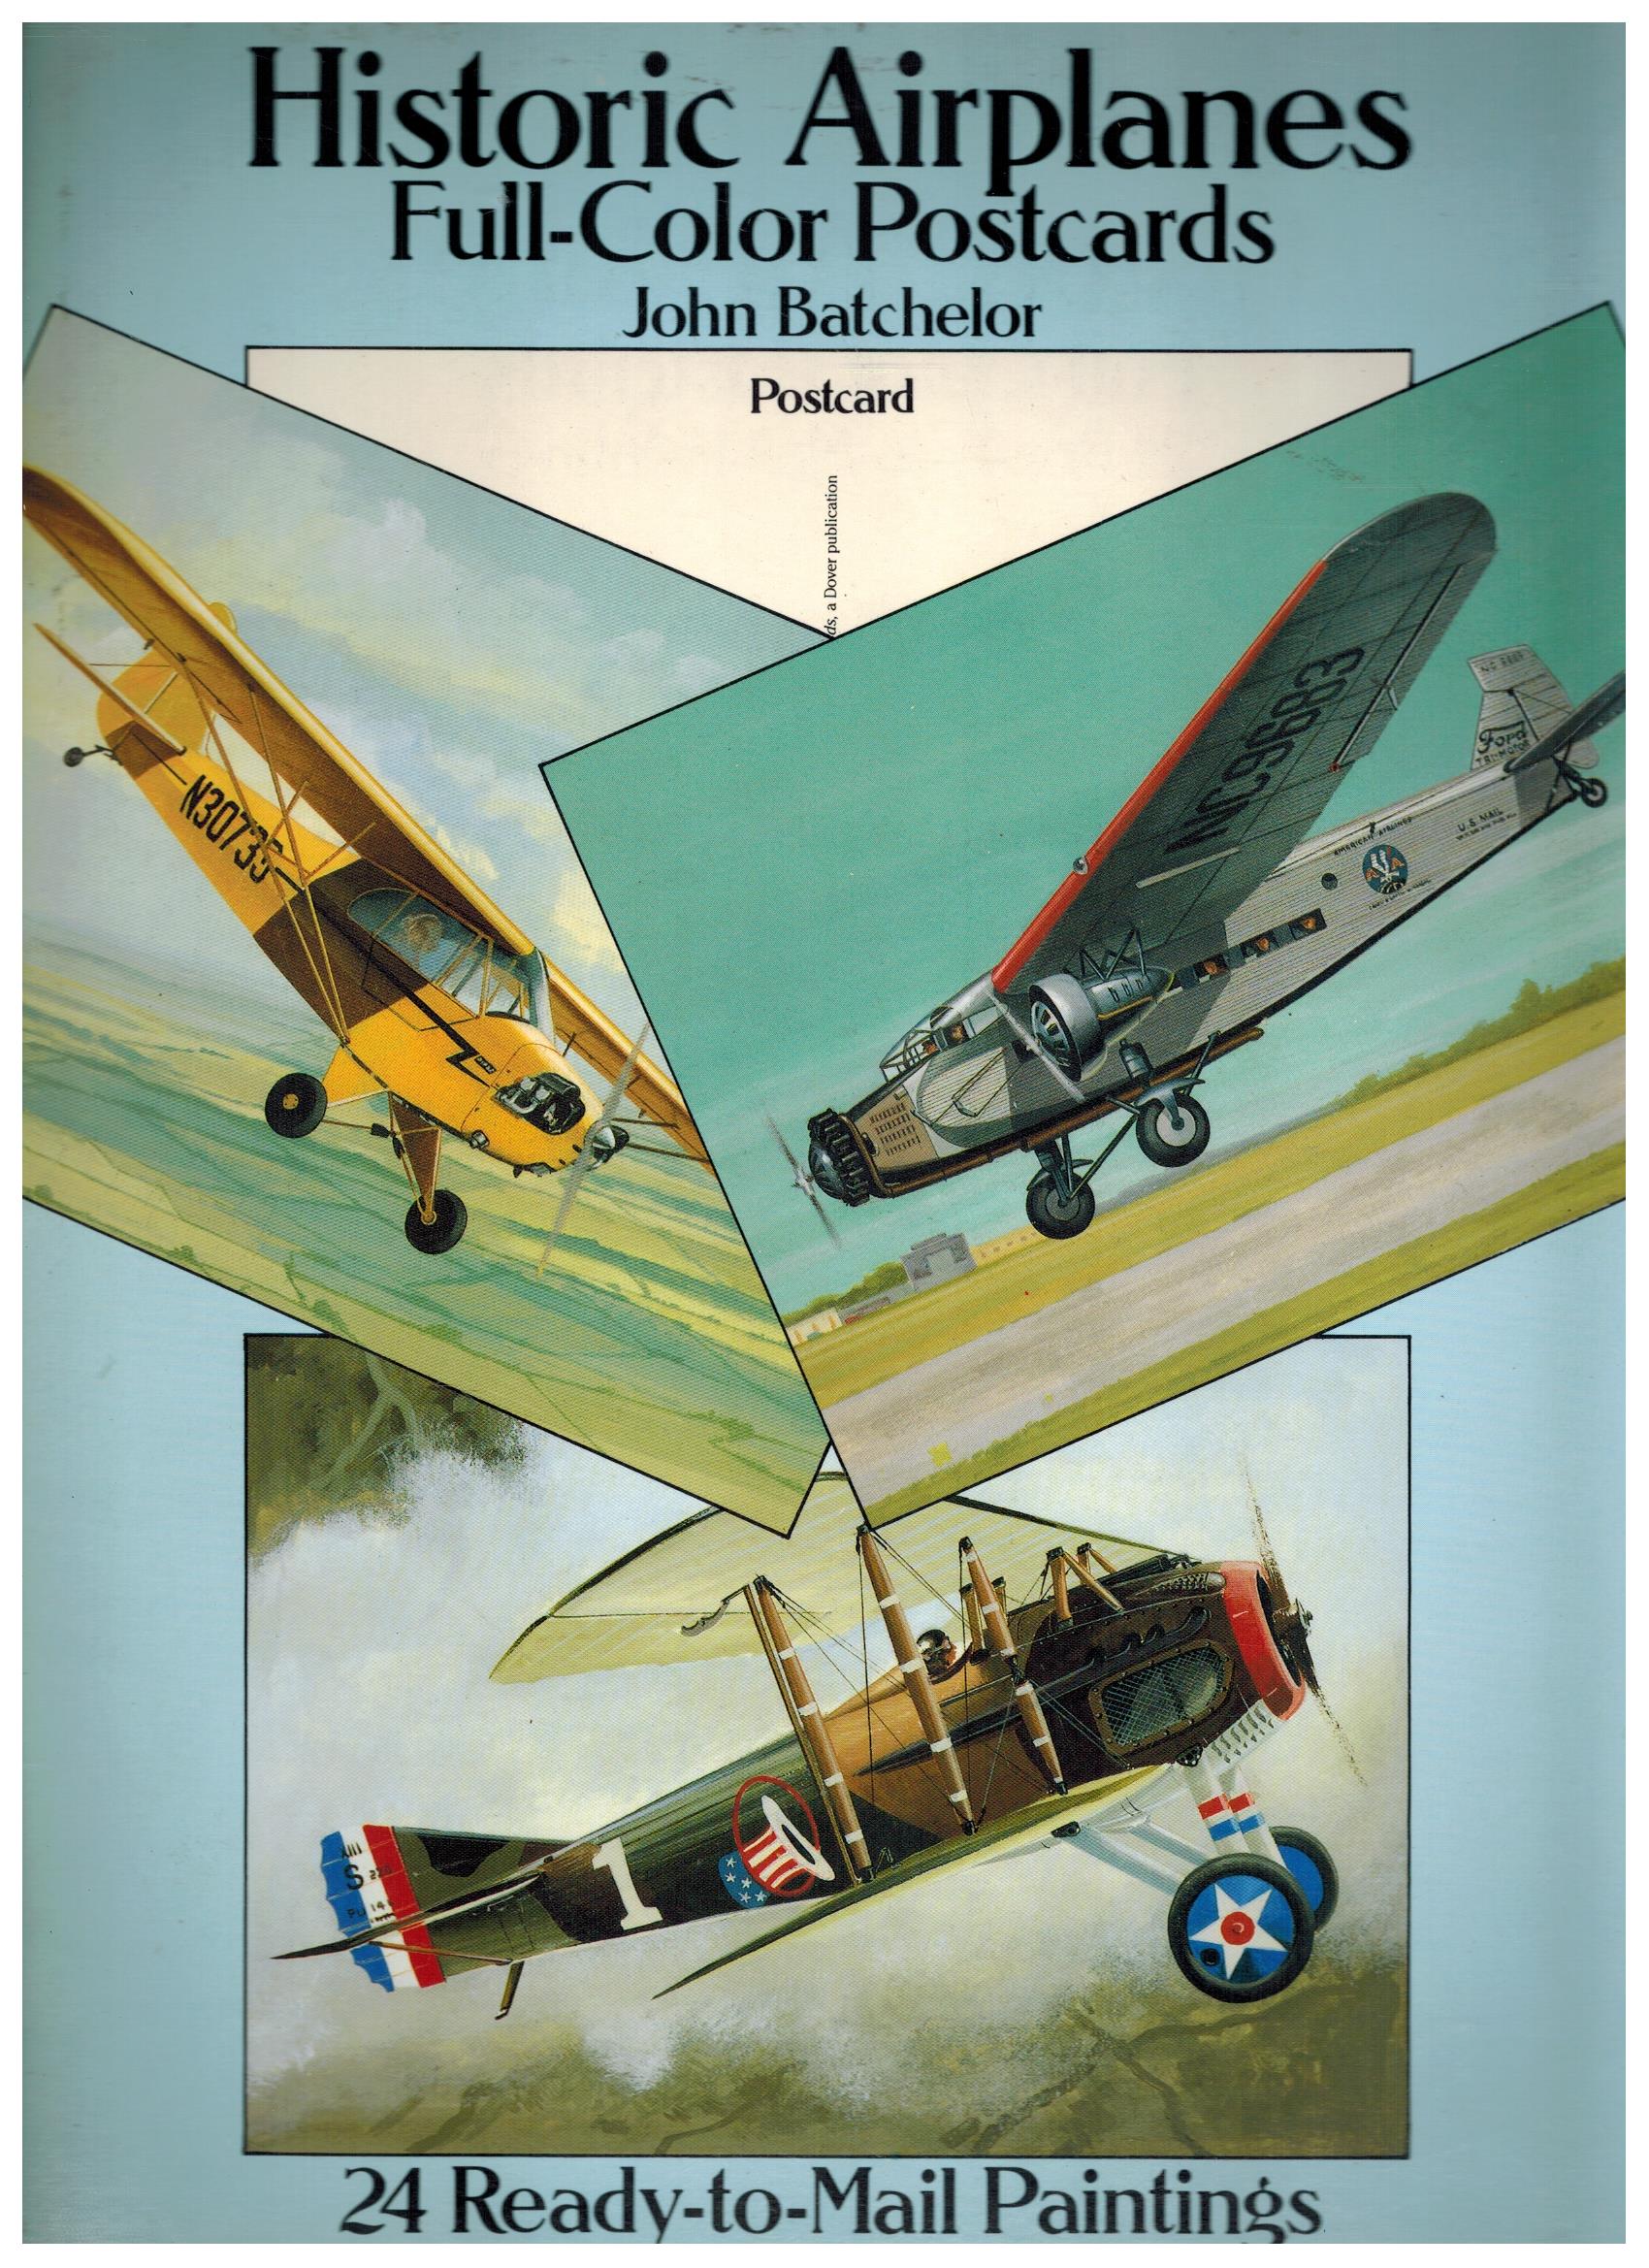 HISTORIC AIRPLANES FULL-COLOR POSTCARDS